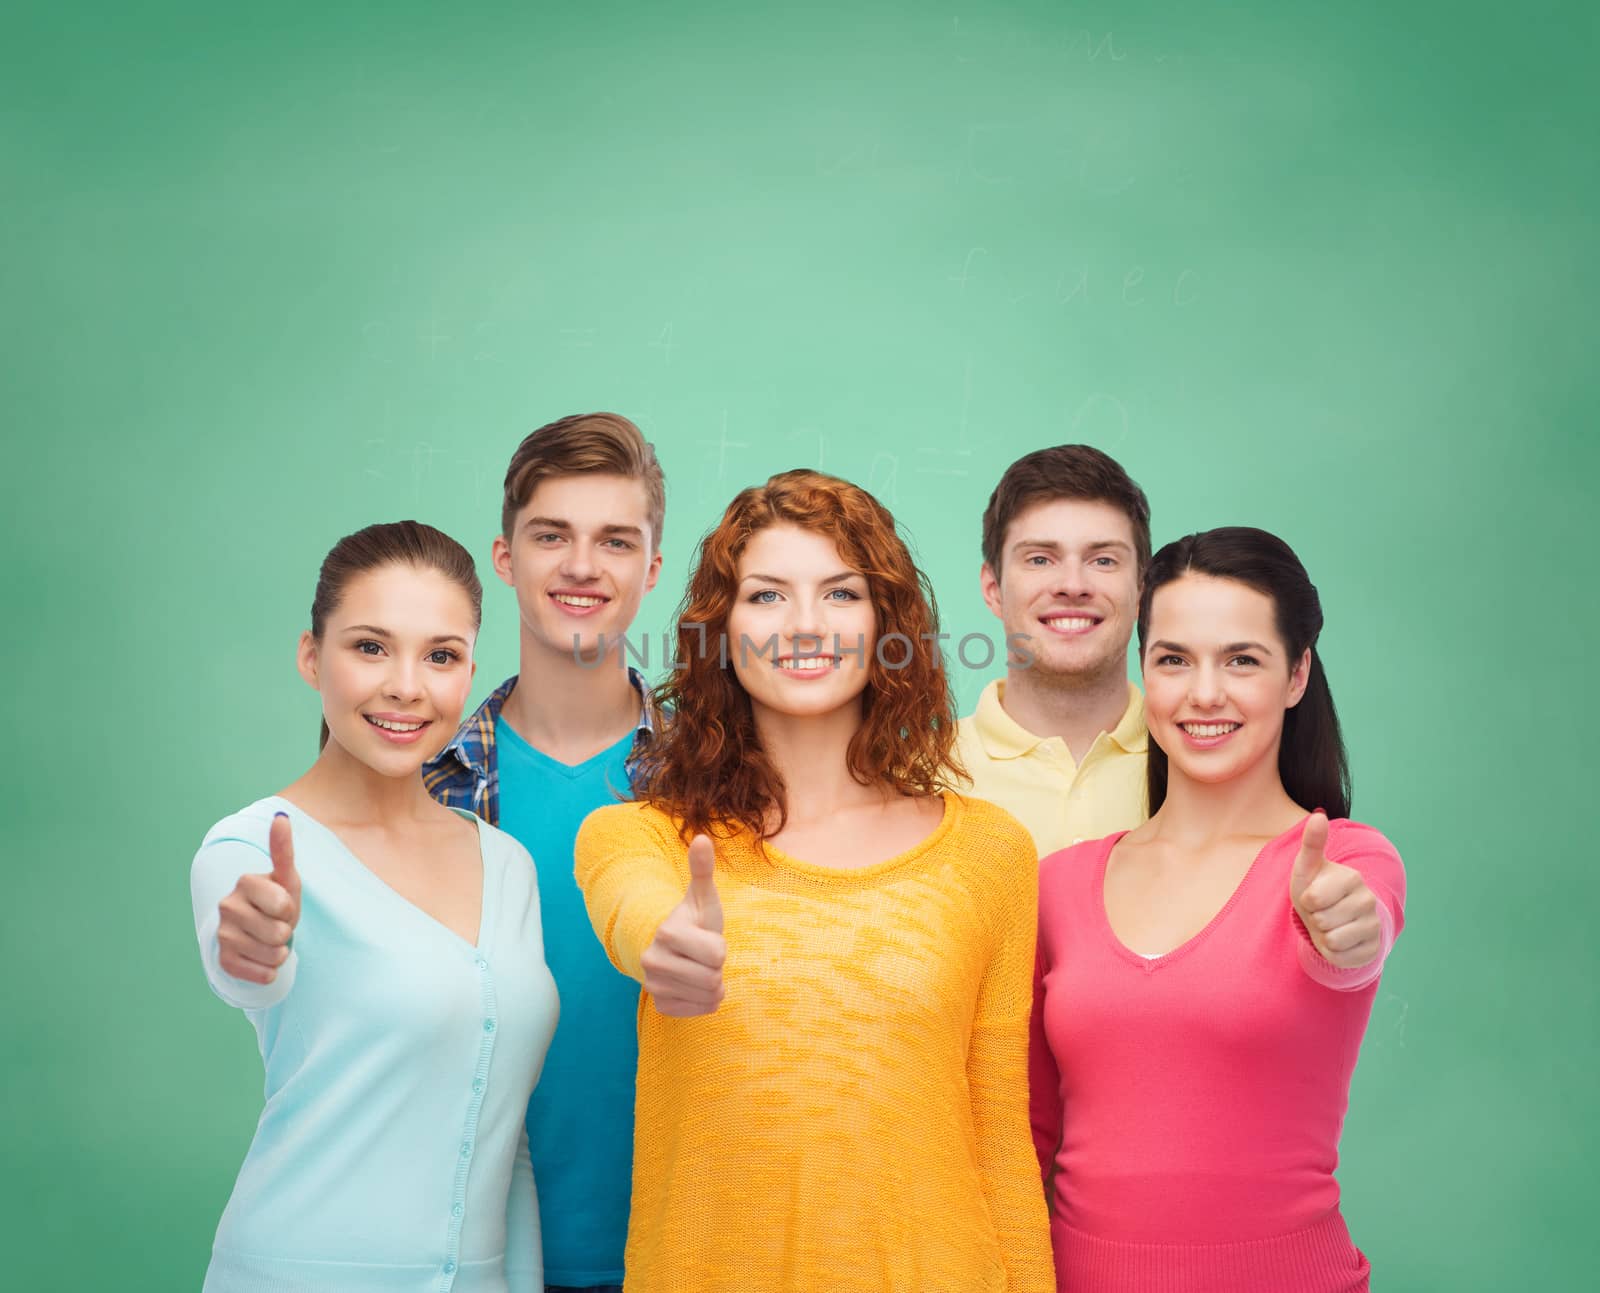 group of smiling teenagers over green board by dolgachov